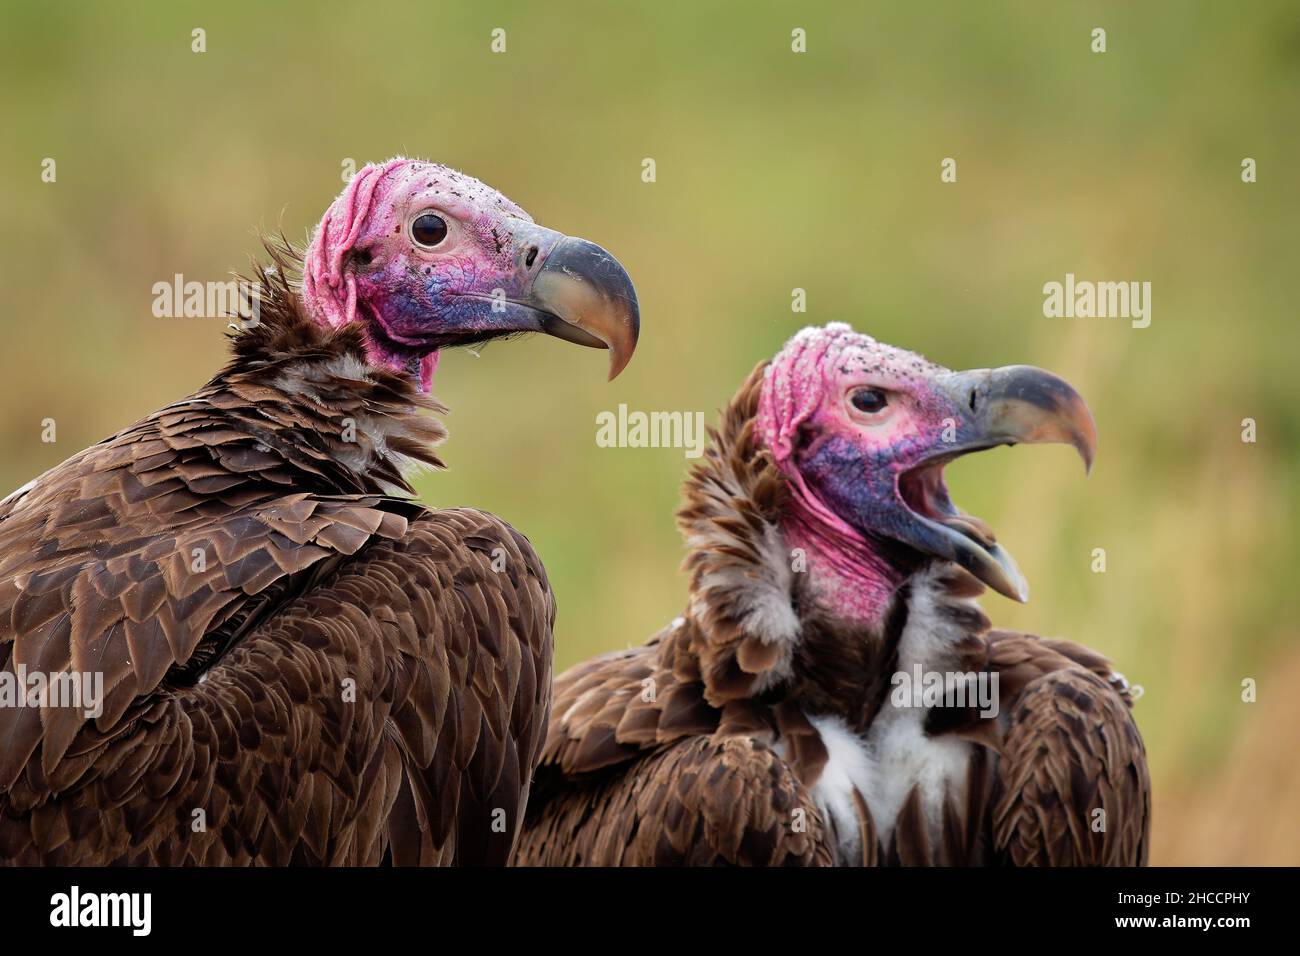 Lappet-faced Vulture or Nubian vulture - Torgos tracheliotos, Old World vulture belonging to bird order Accipitriformes, pair two scavengers feeding o Stock Photo